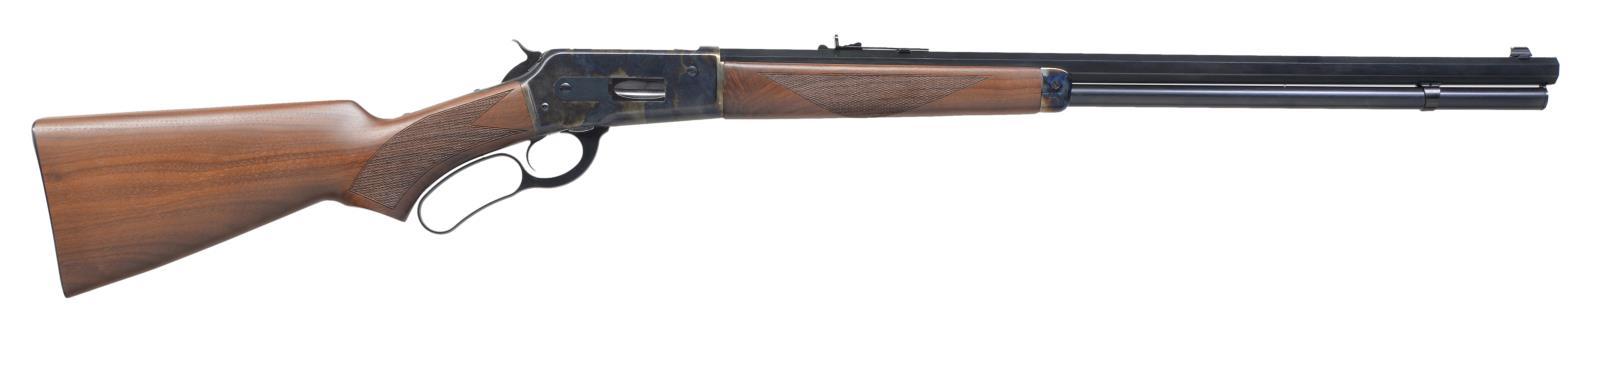 A. UBERTI 1886 SPORTING LEVER ACTION RIFLE.